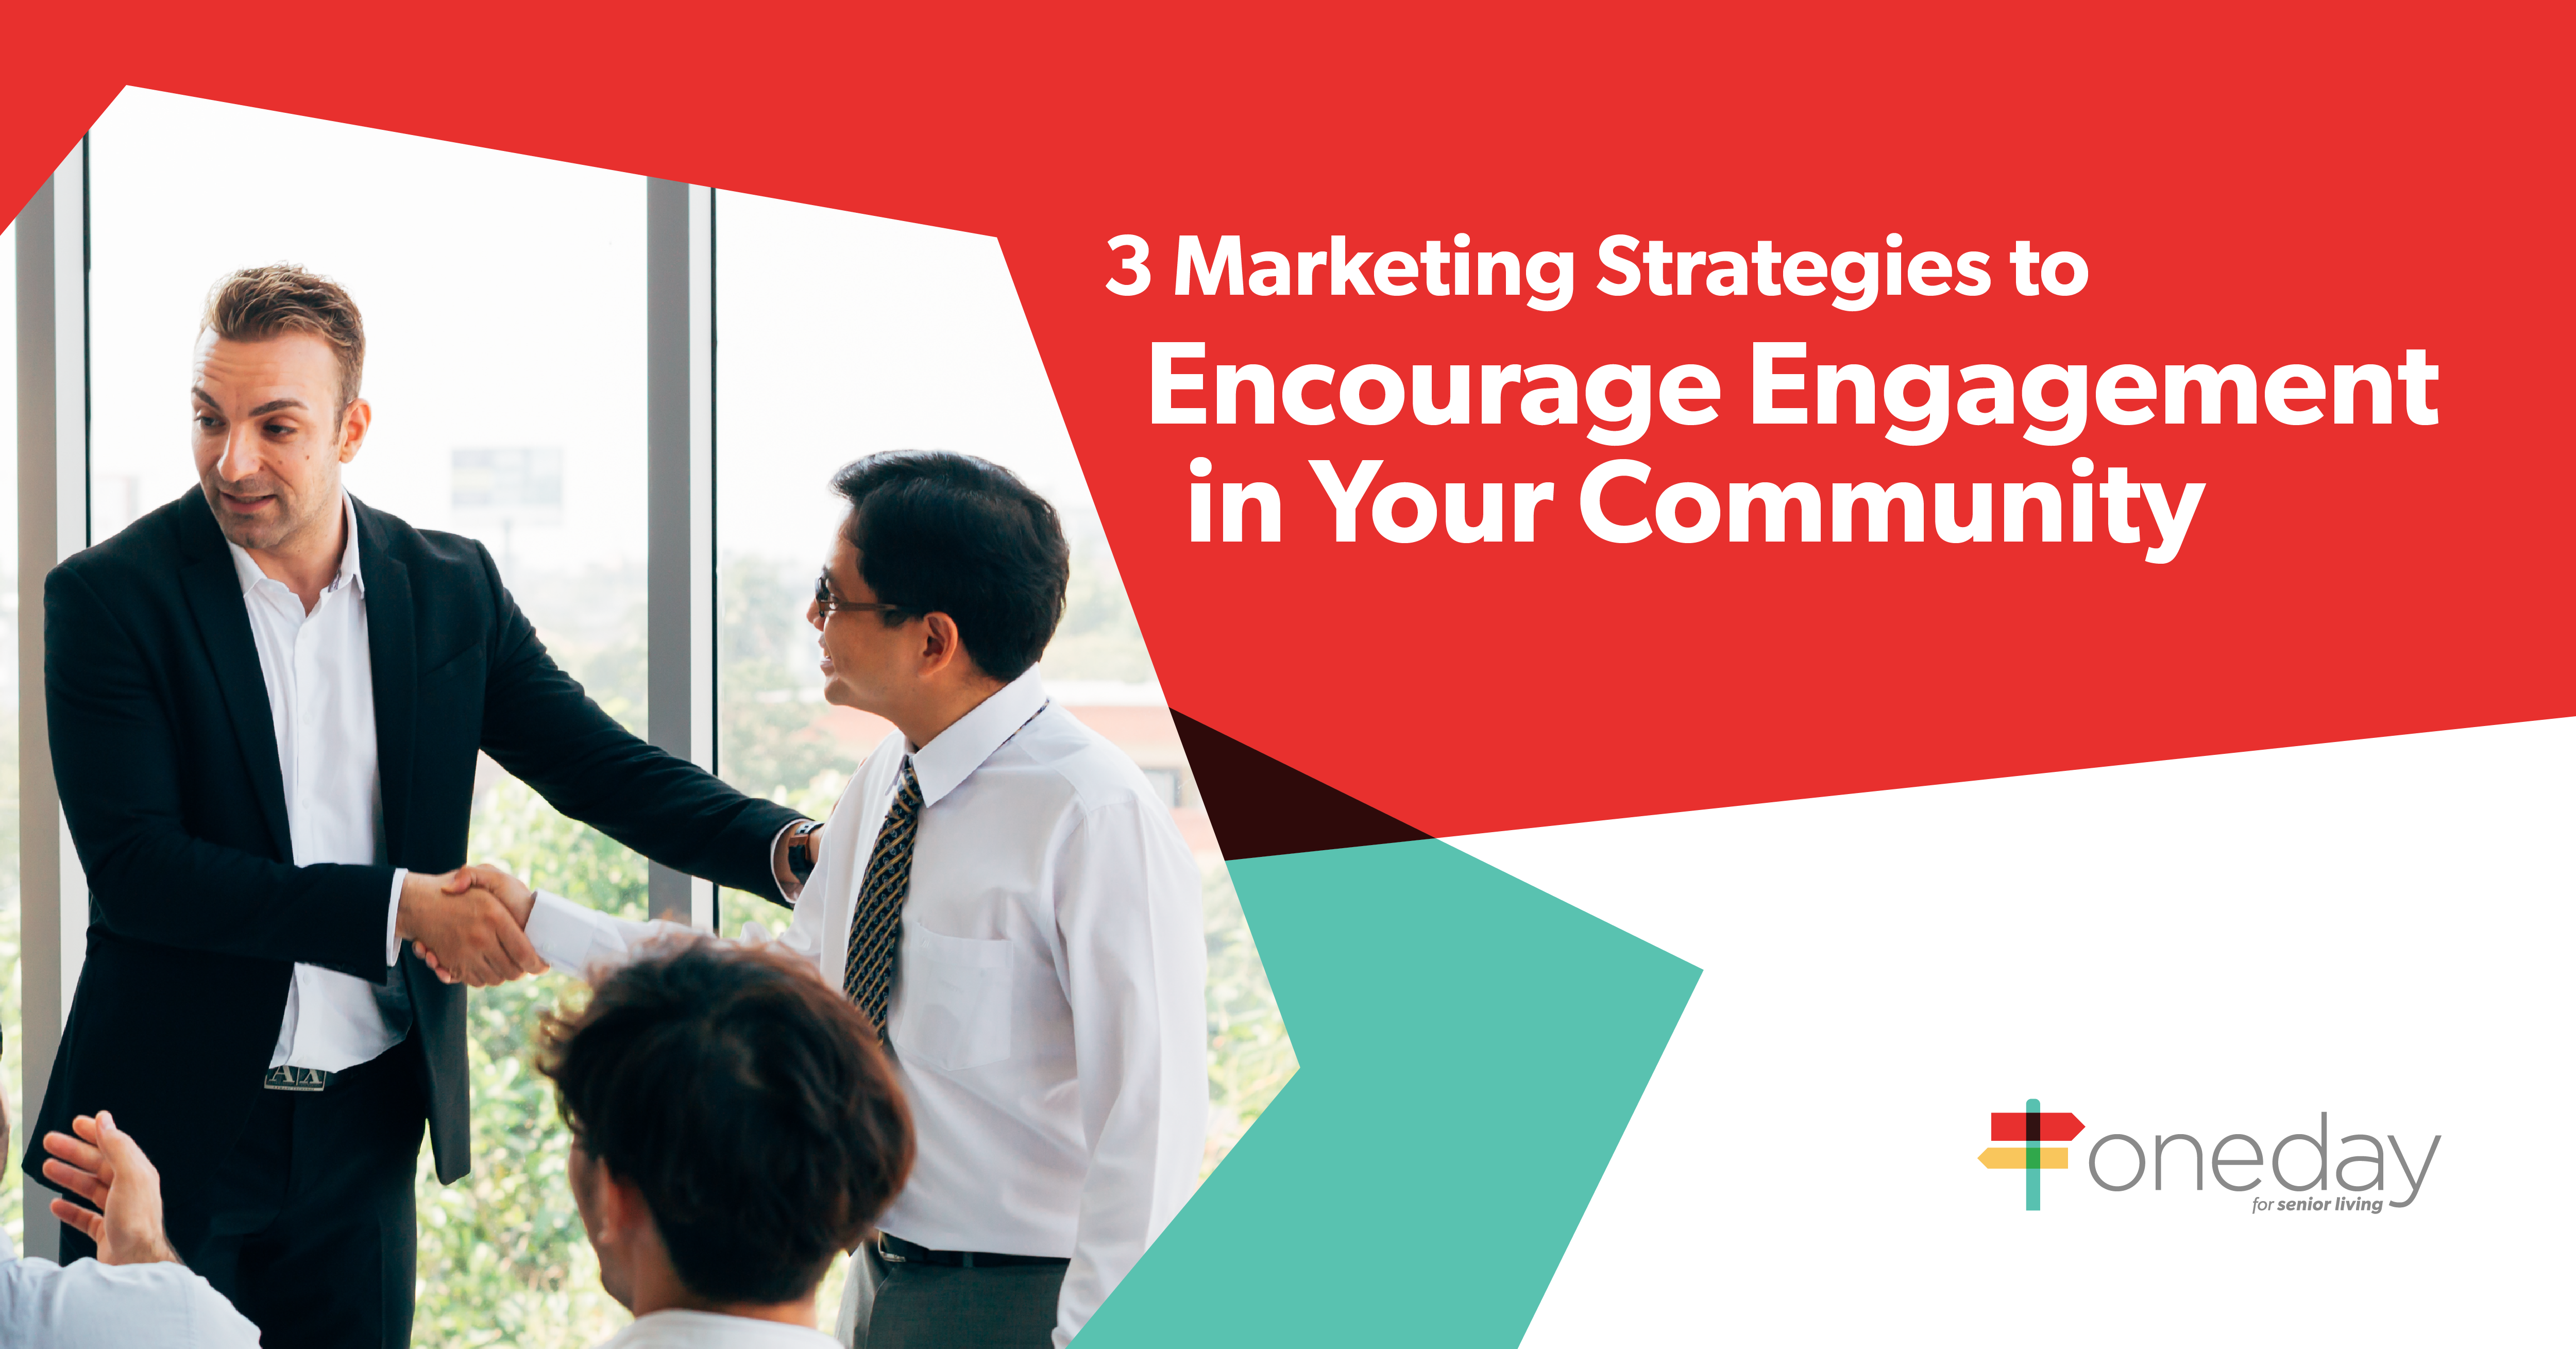 Simple tools and tactics you can use in your senior living community’s marketing to maximize engagement and forming connections with your target audience.